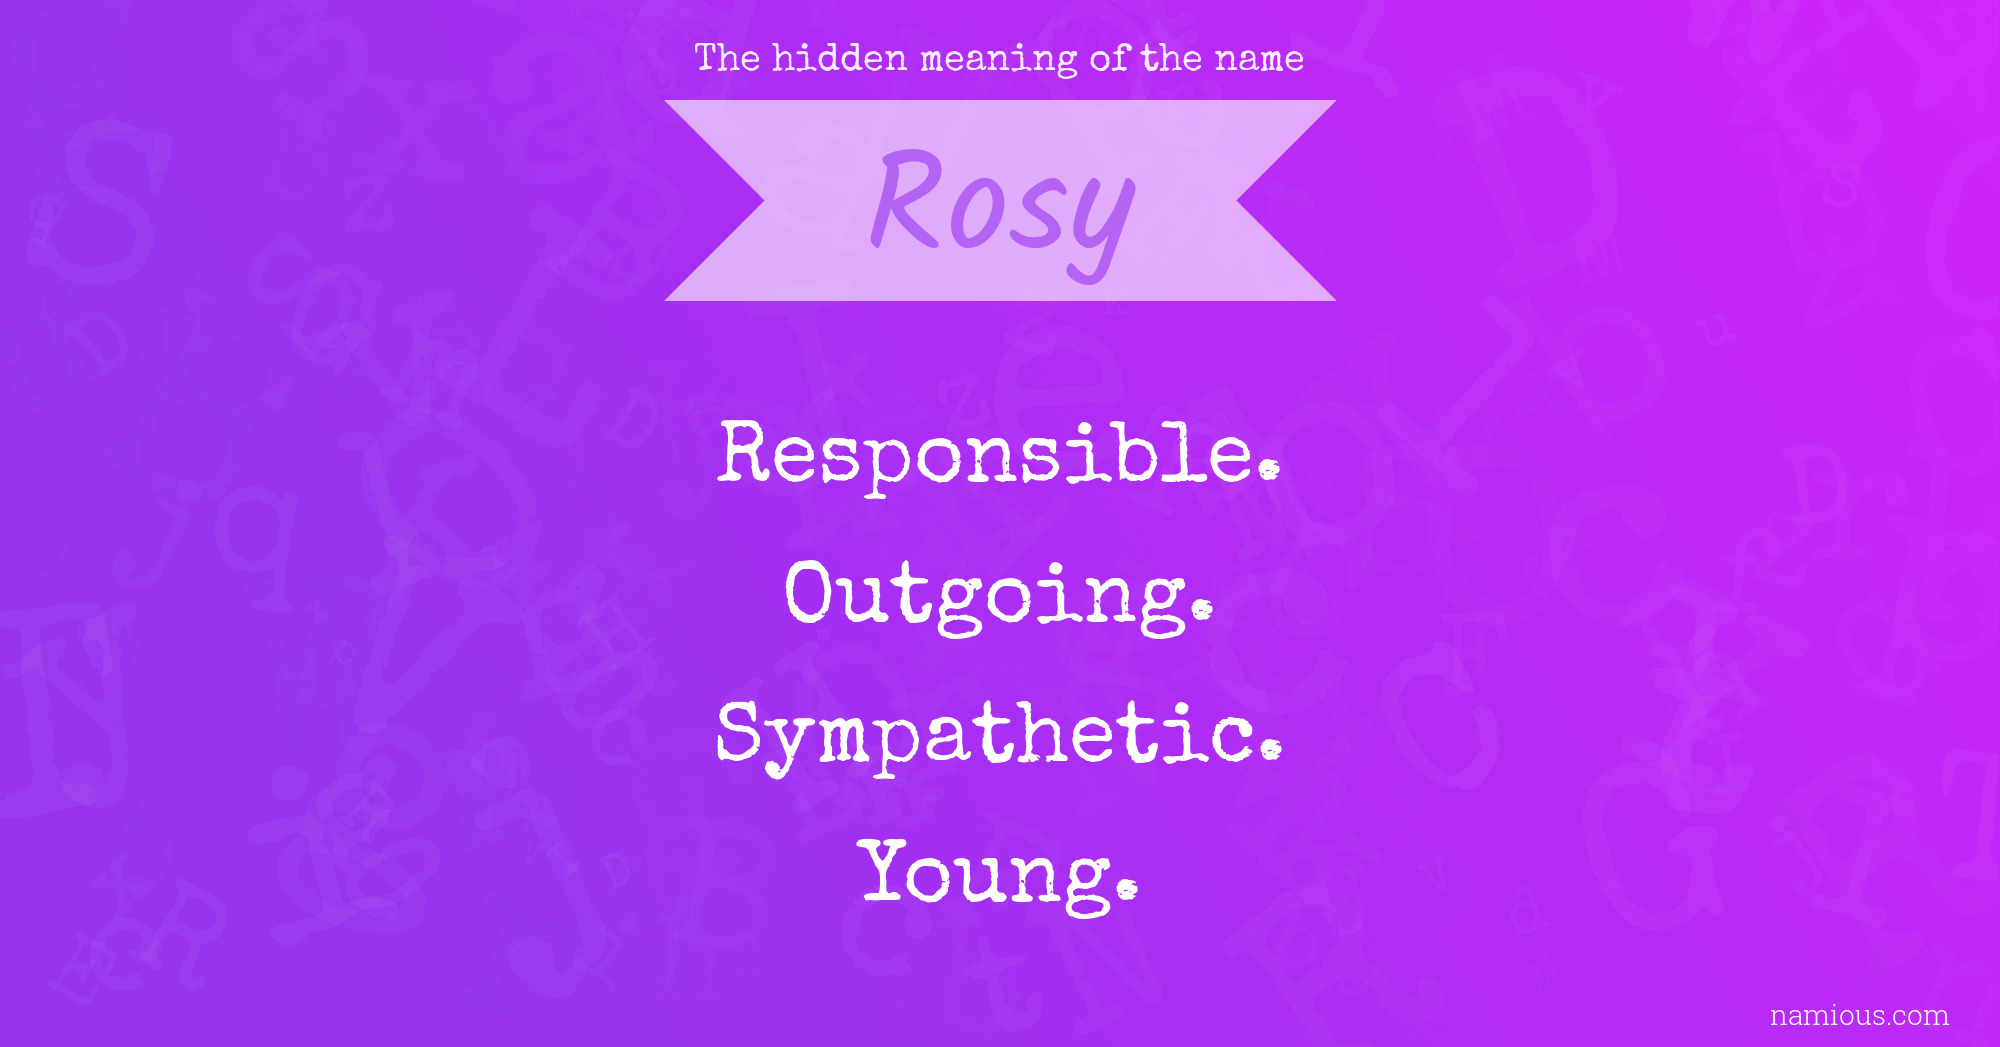 The hidden meaning of the name Rosy